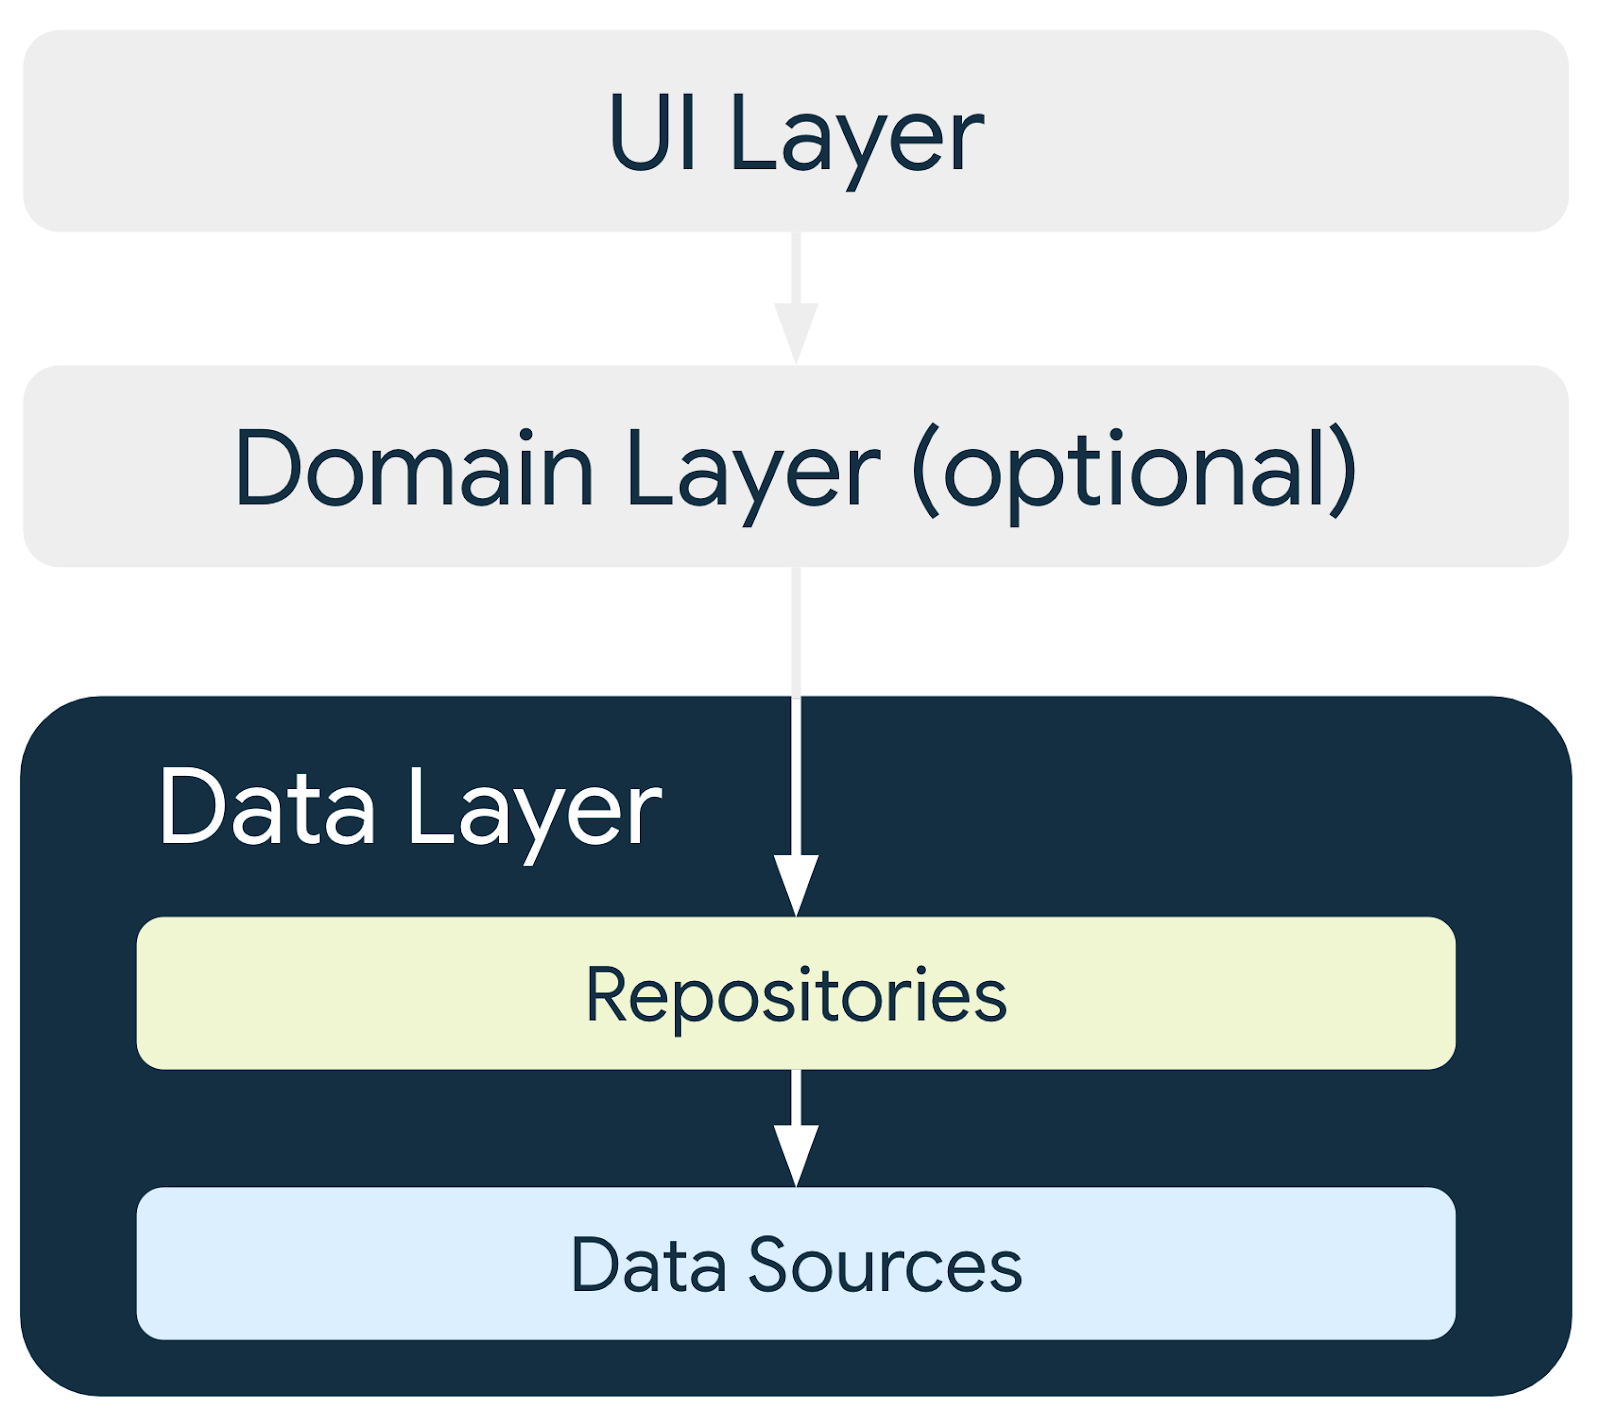 data layer contains repositories and data sources